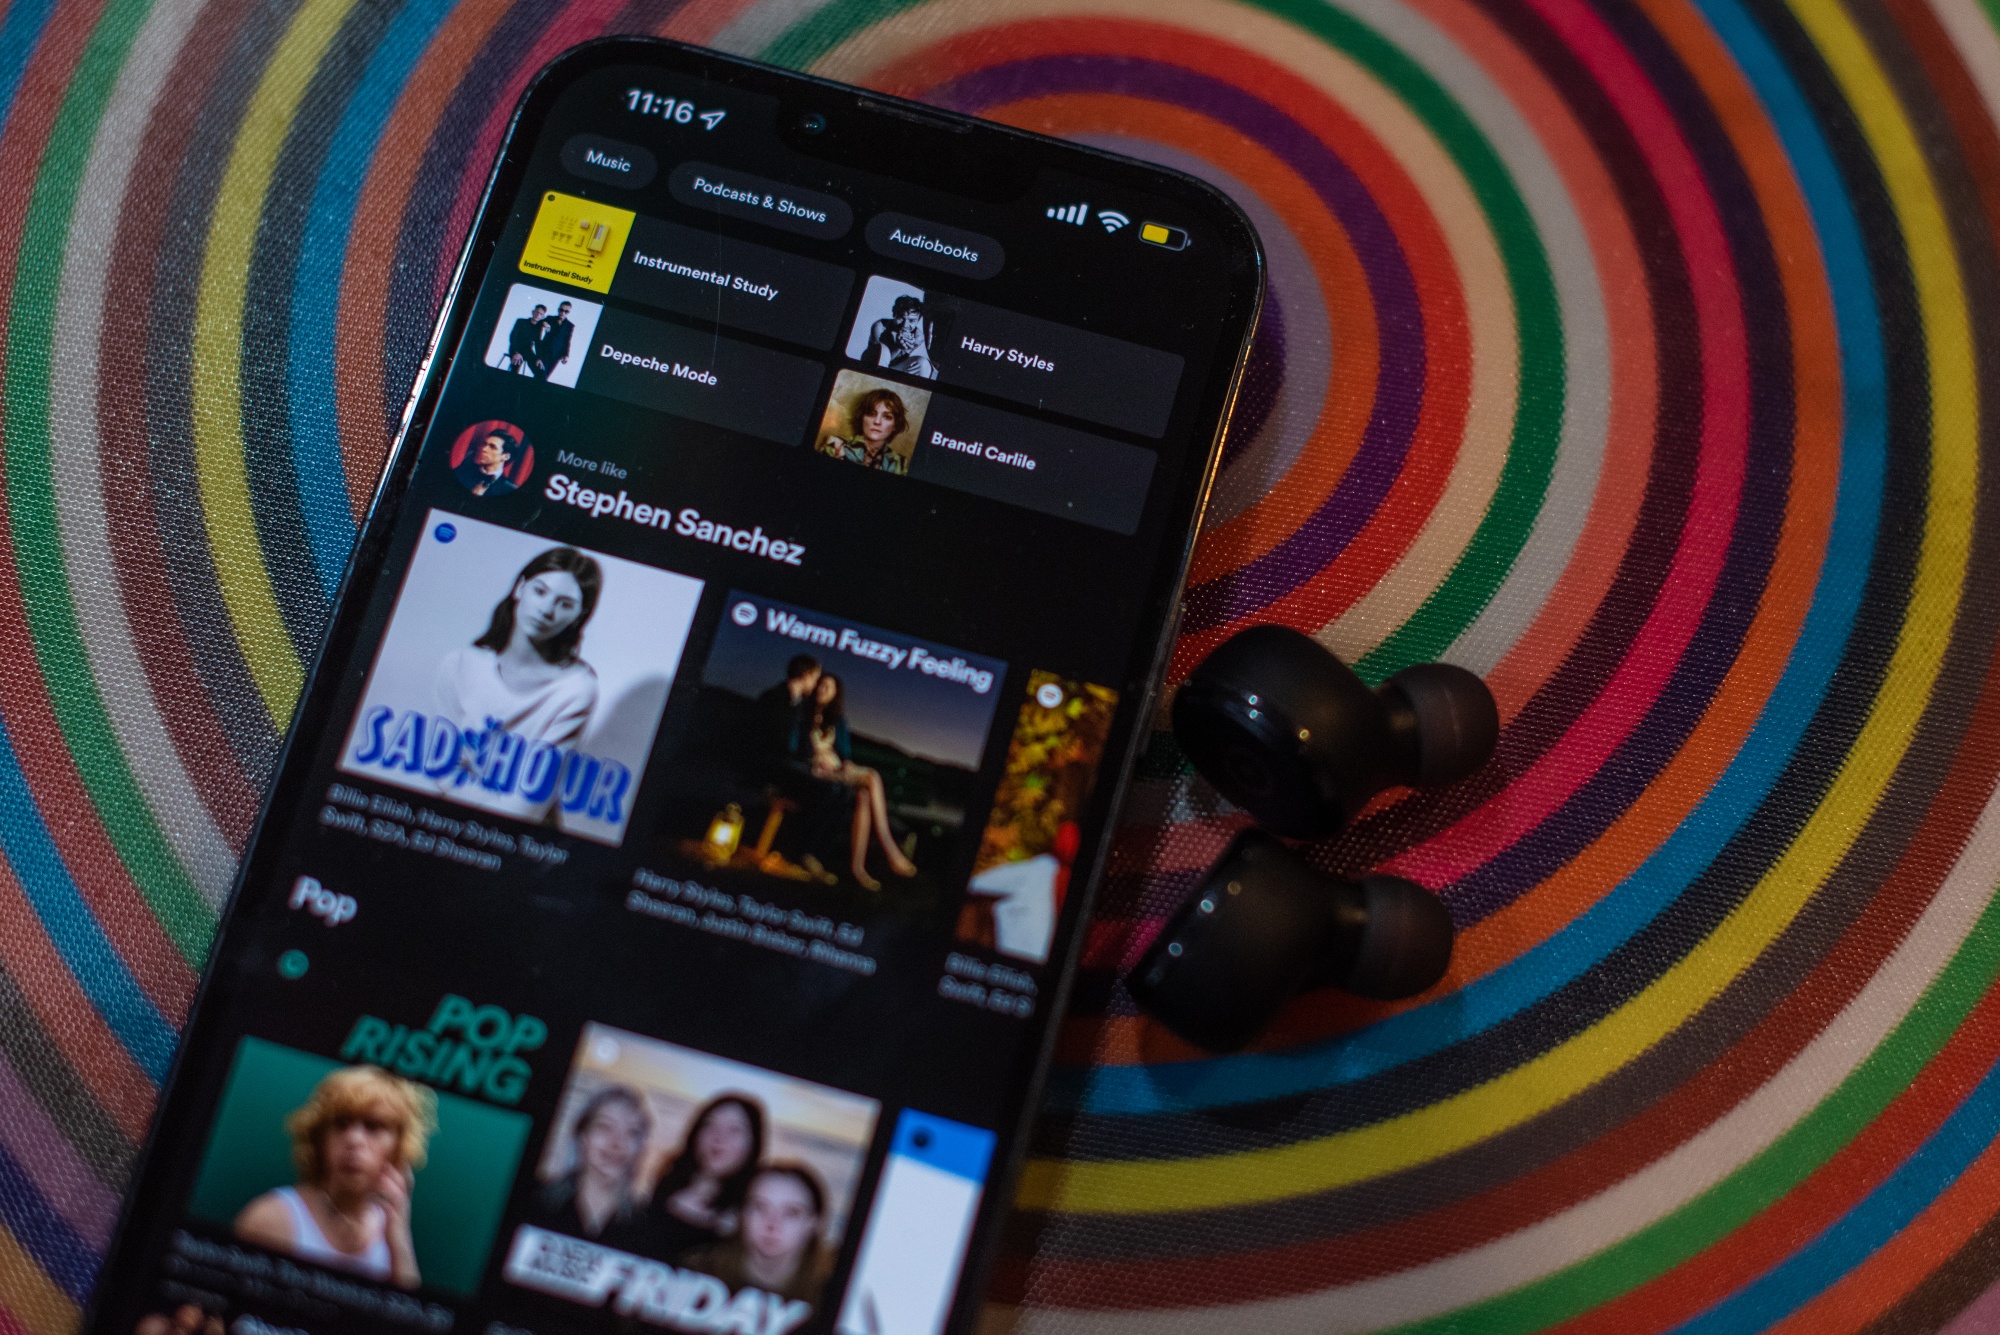 Spotify Has Plans To Move Beyond Music And Become The Instagram